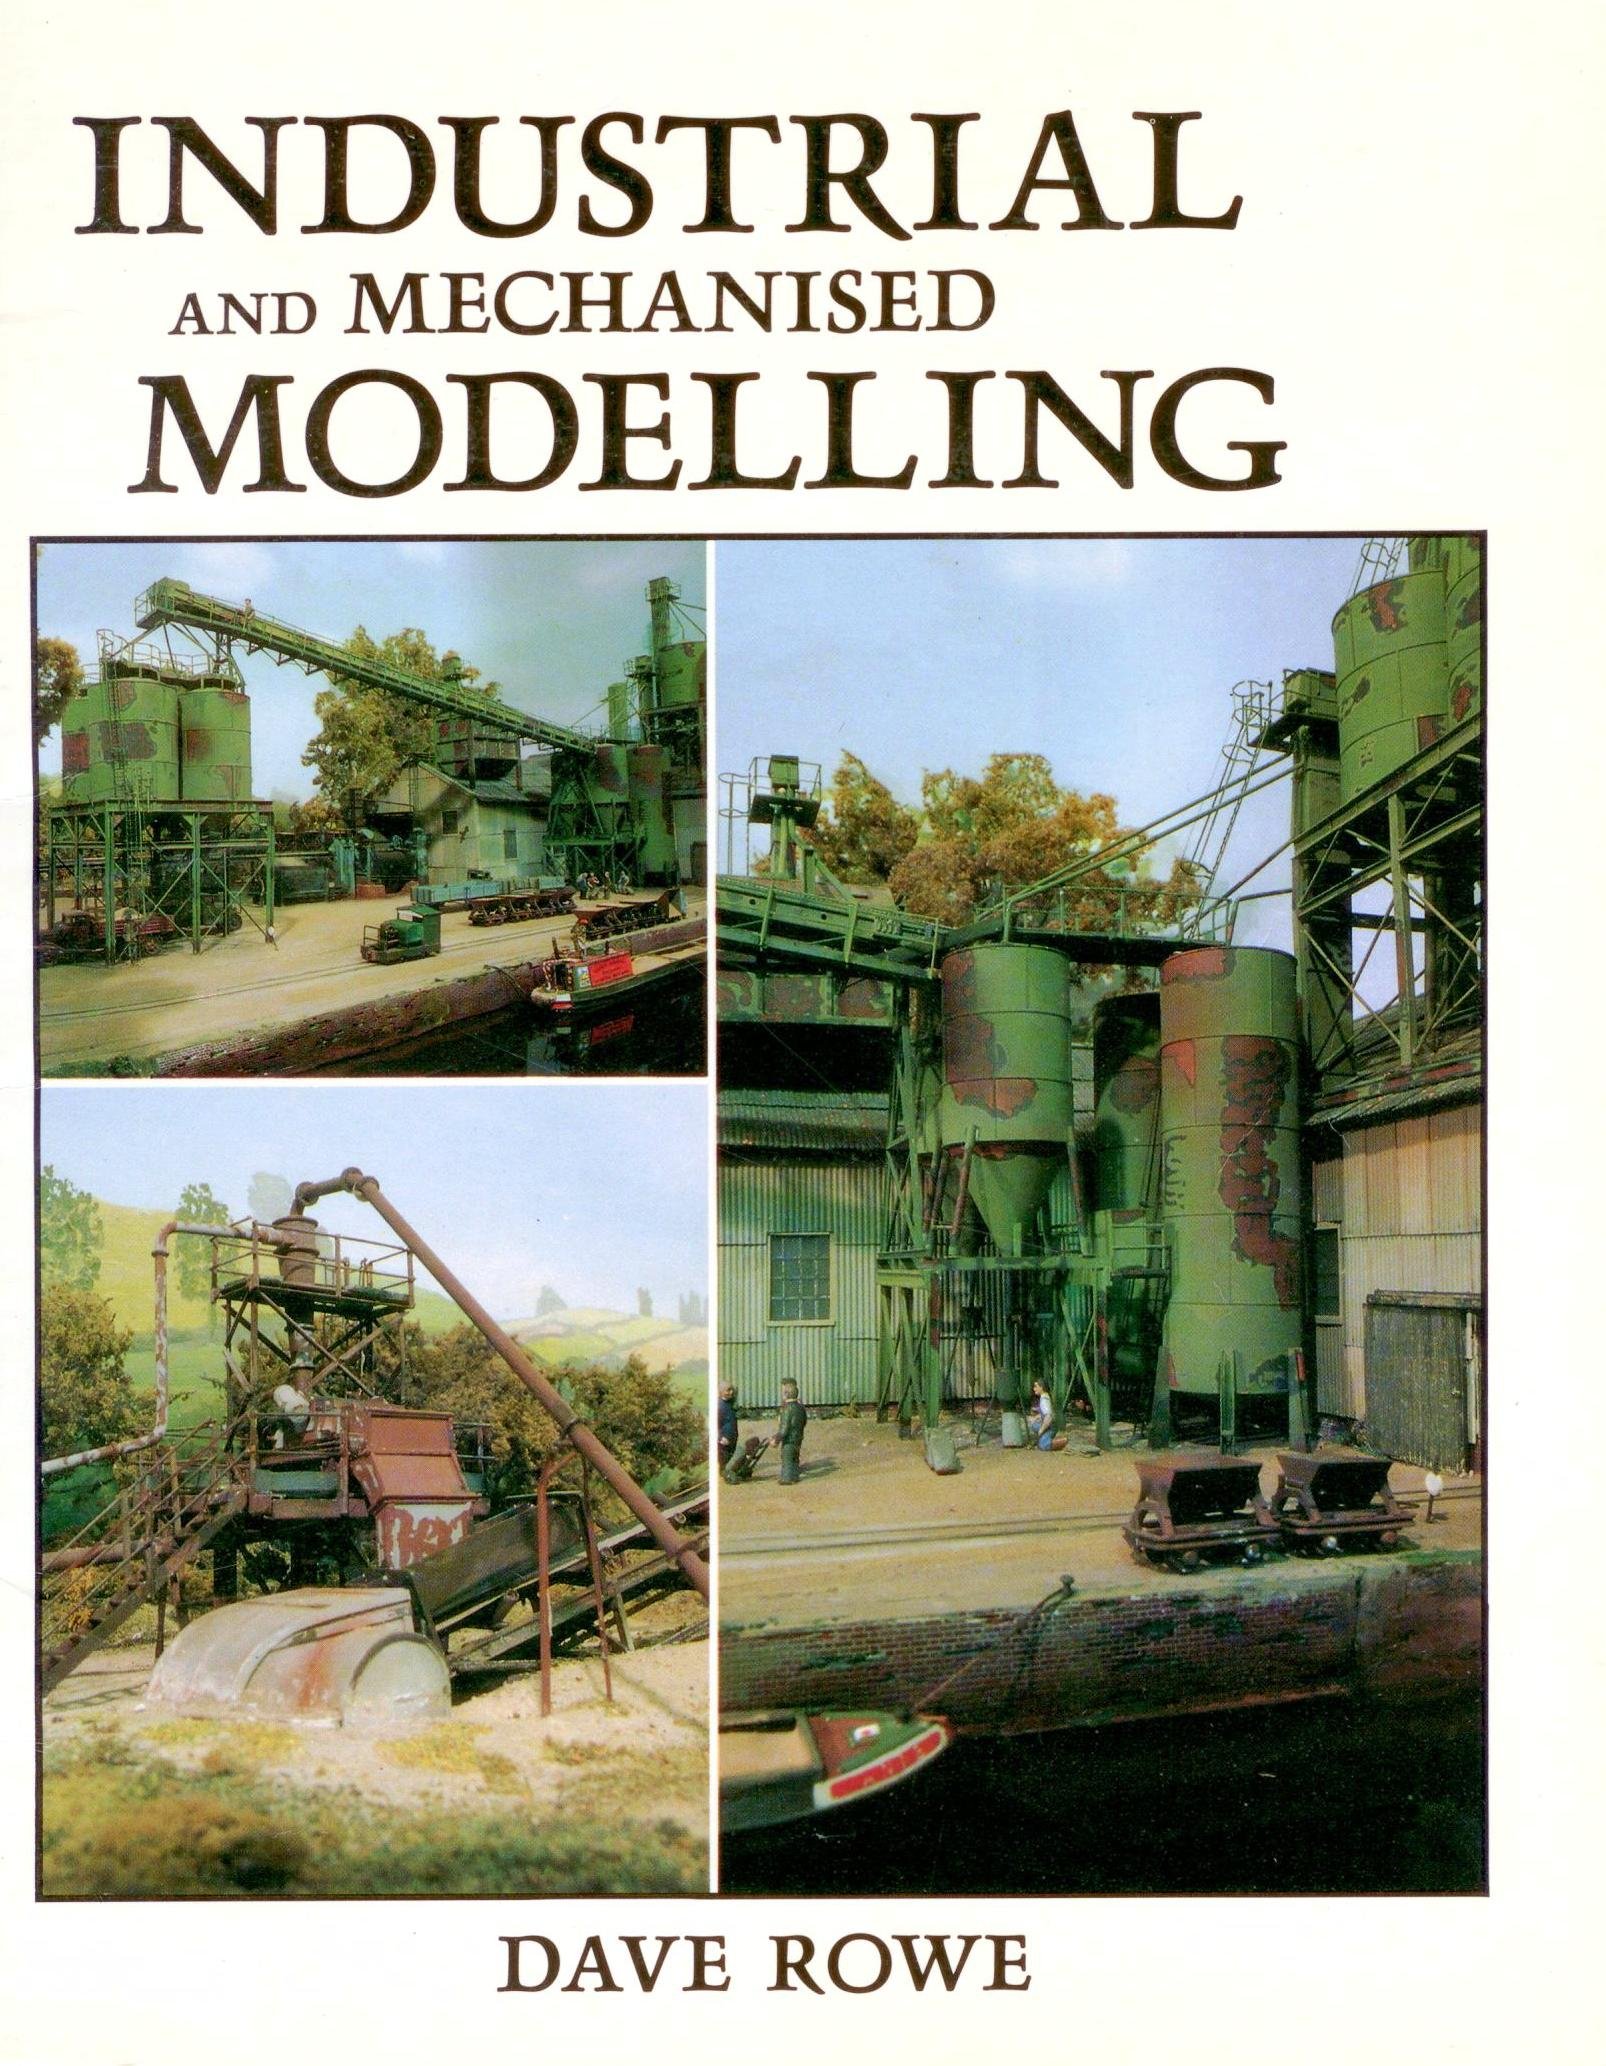 Industrial and Mechanised Modelling